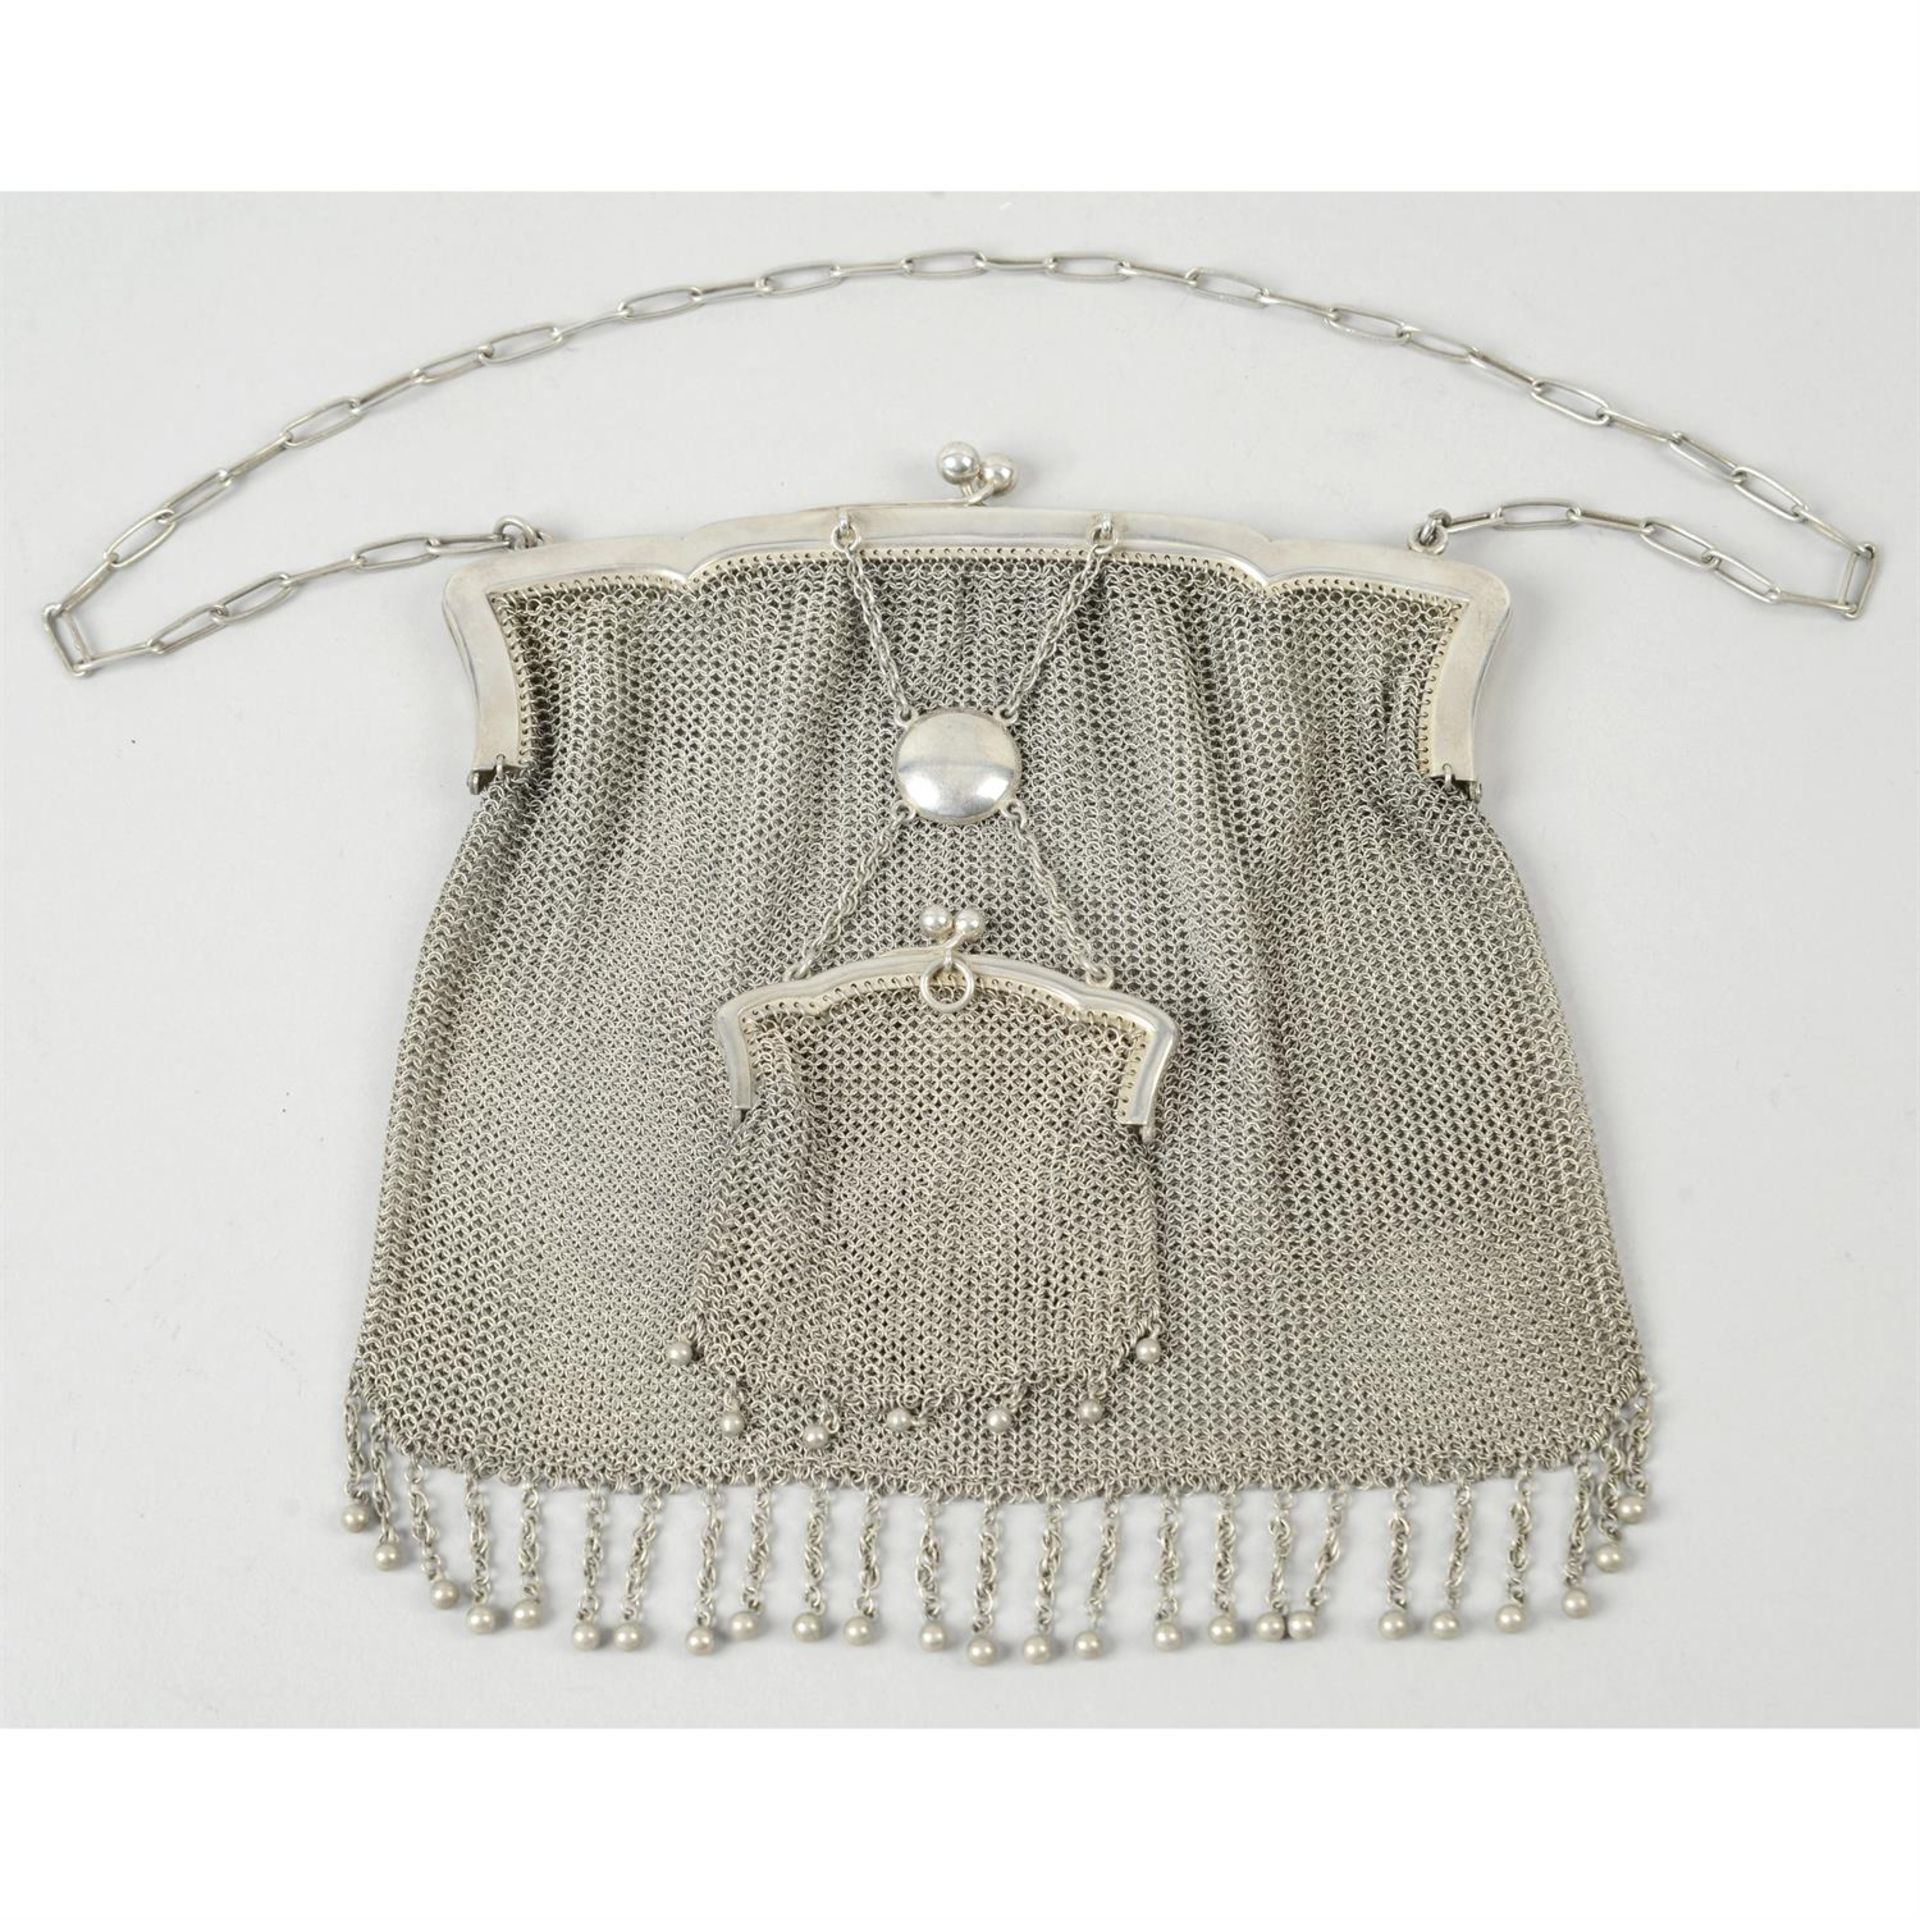 A silver mesh bag with attached mesh purse.